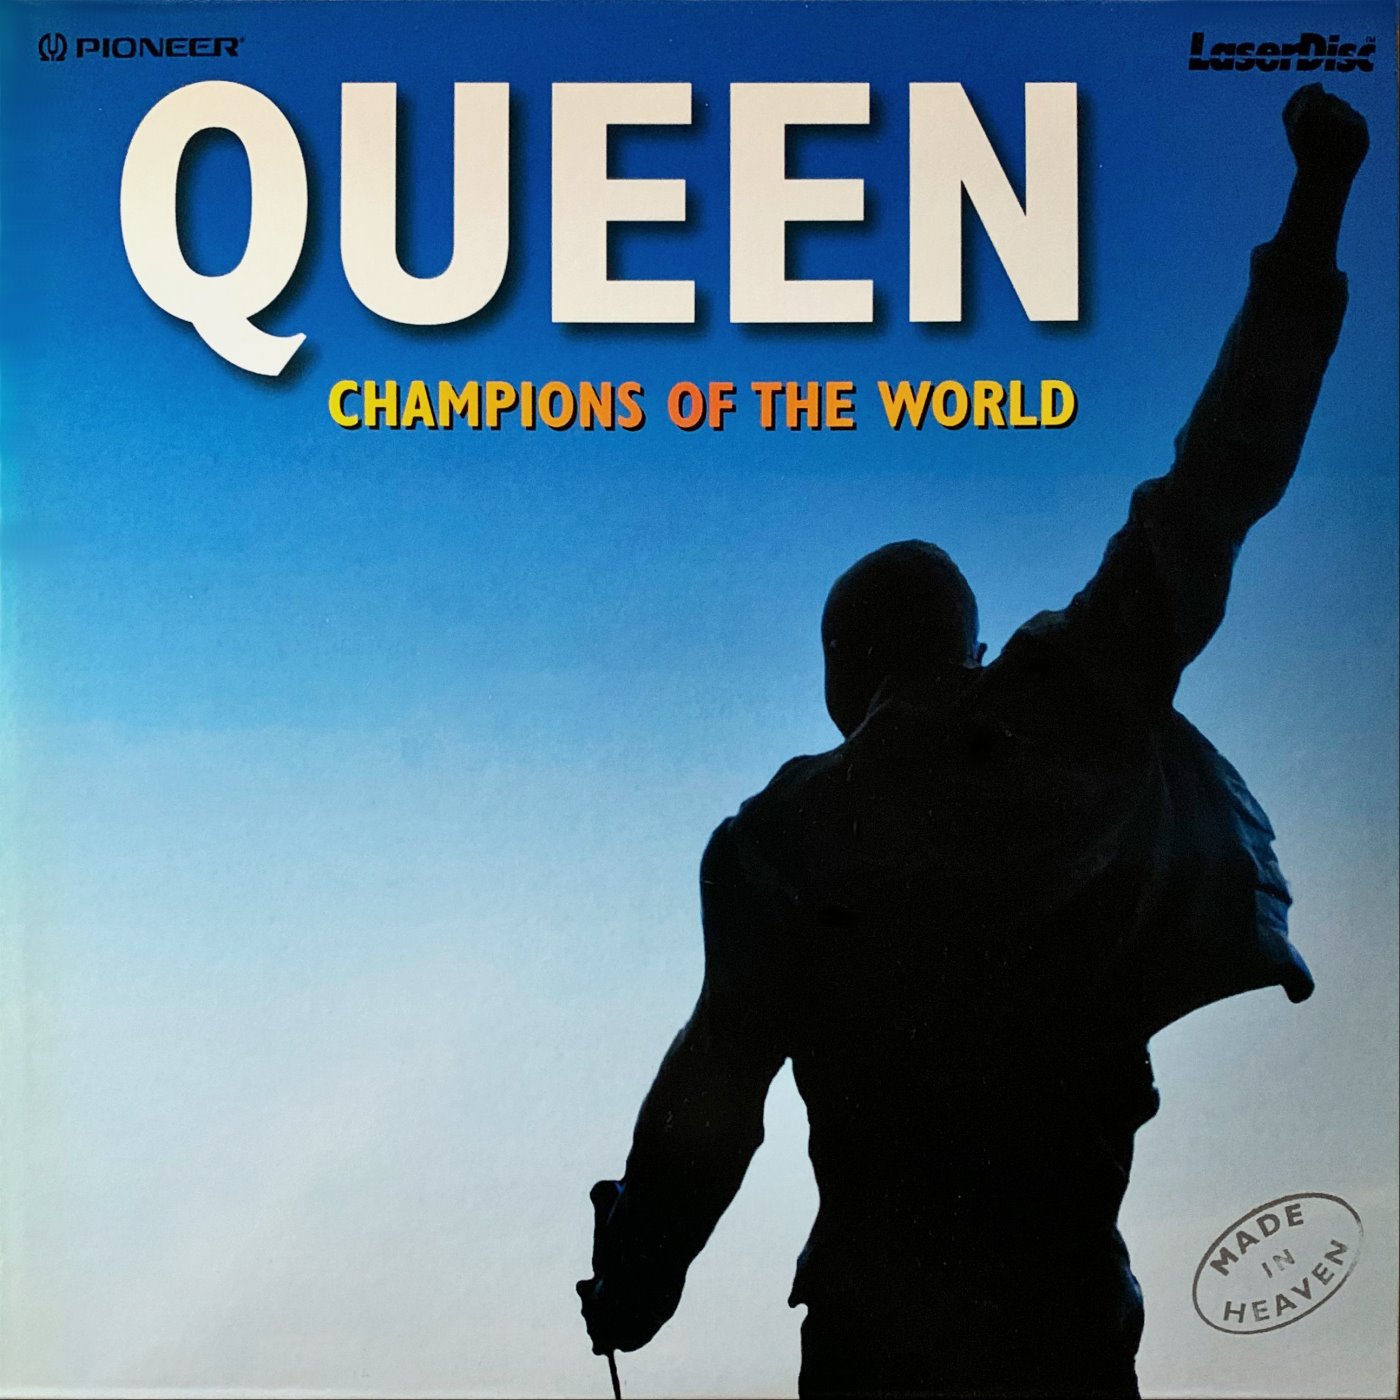 Cover - Queen - Champions Of The World.jpg